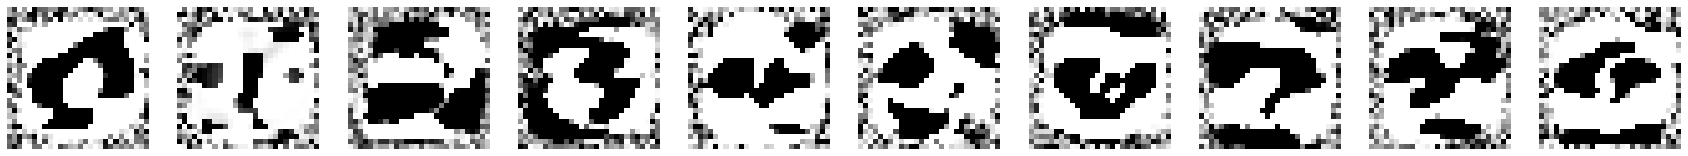 10 black-and-white images with noisy borders and even starker black-and-white patterns vaguely resembling the digits 0 through 9